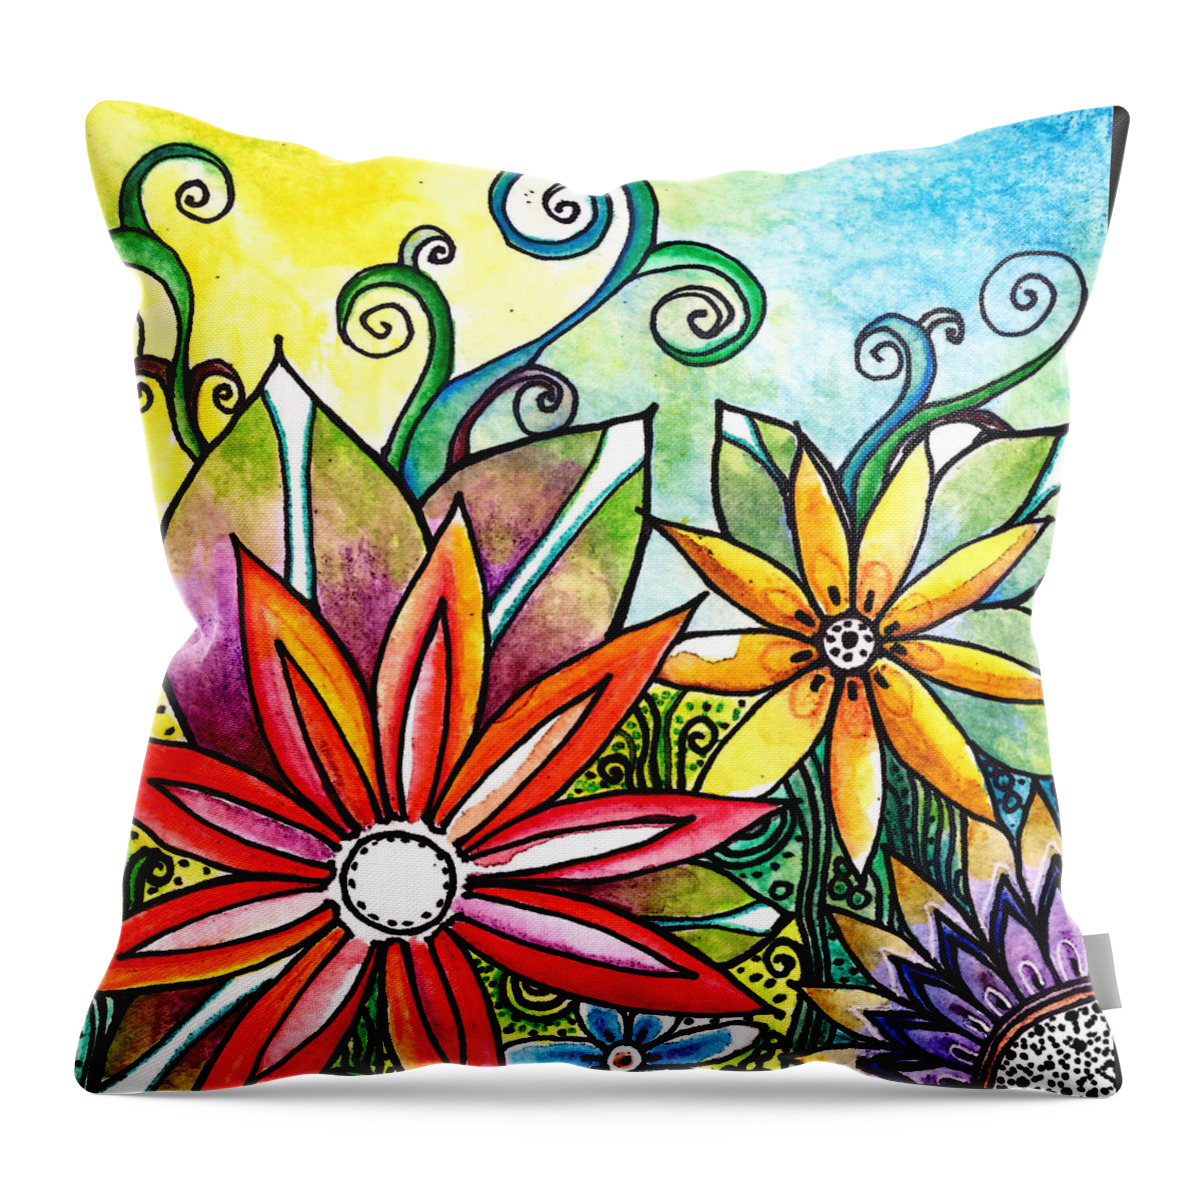 Flowers Throw Pillow featuring the painting The Garden by Robin Mead